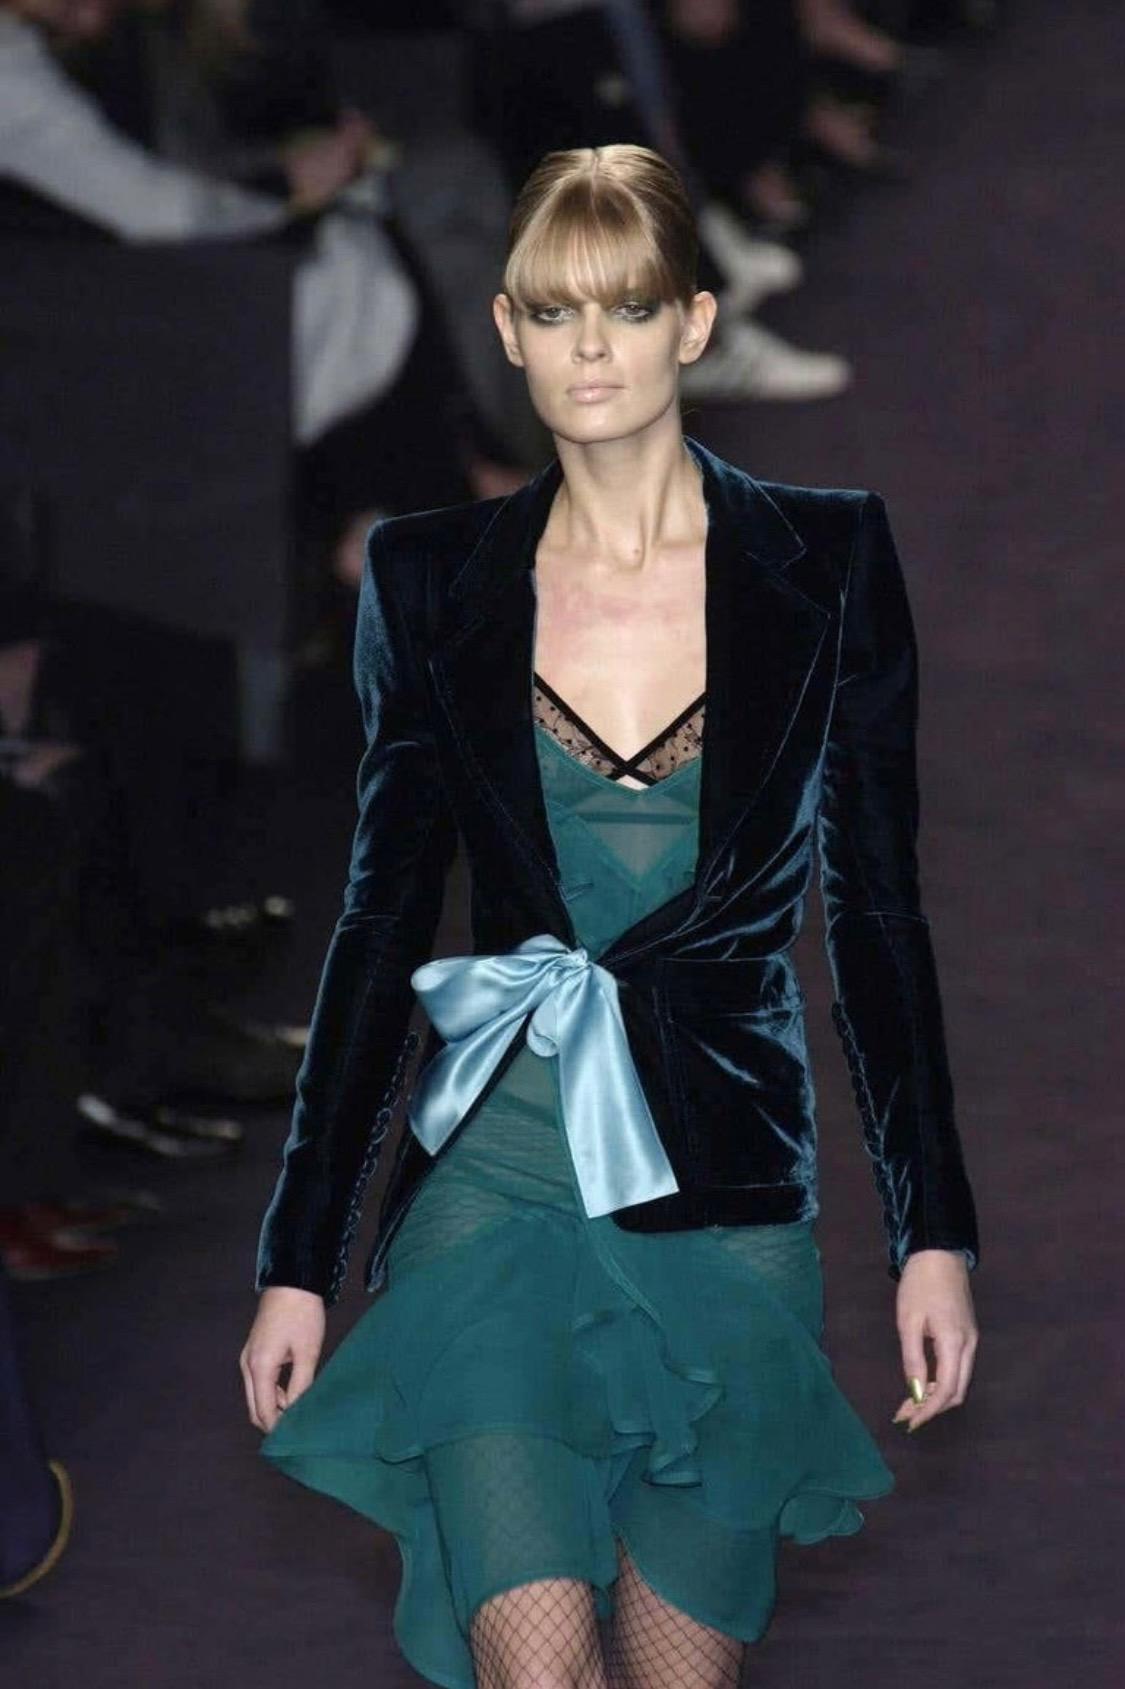 Presenting an iconic teal green Yves Saint Laurent Rive Gauche viscose tank top, designed by Tom Ford. From the Fall/Winter 2003 collection, a dress version of this top debuted on the season's runway as look 1 modeled by Julia Stegner and in the